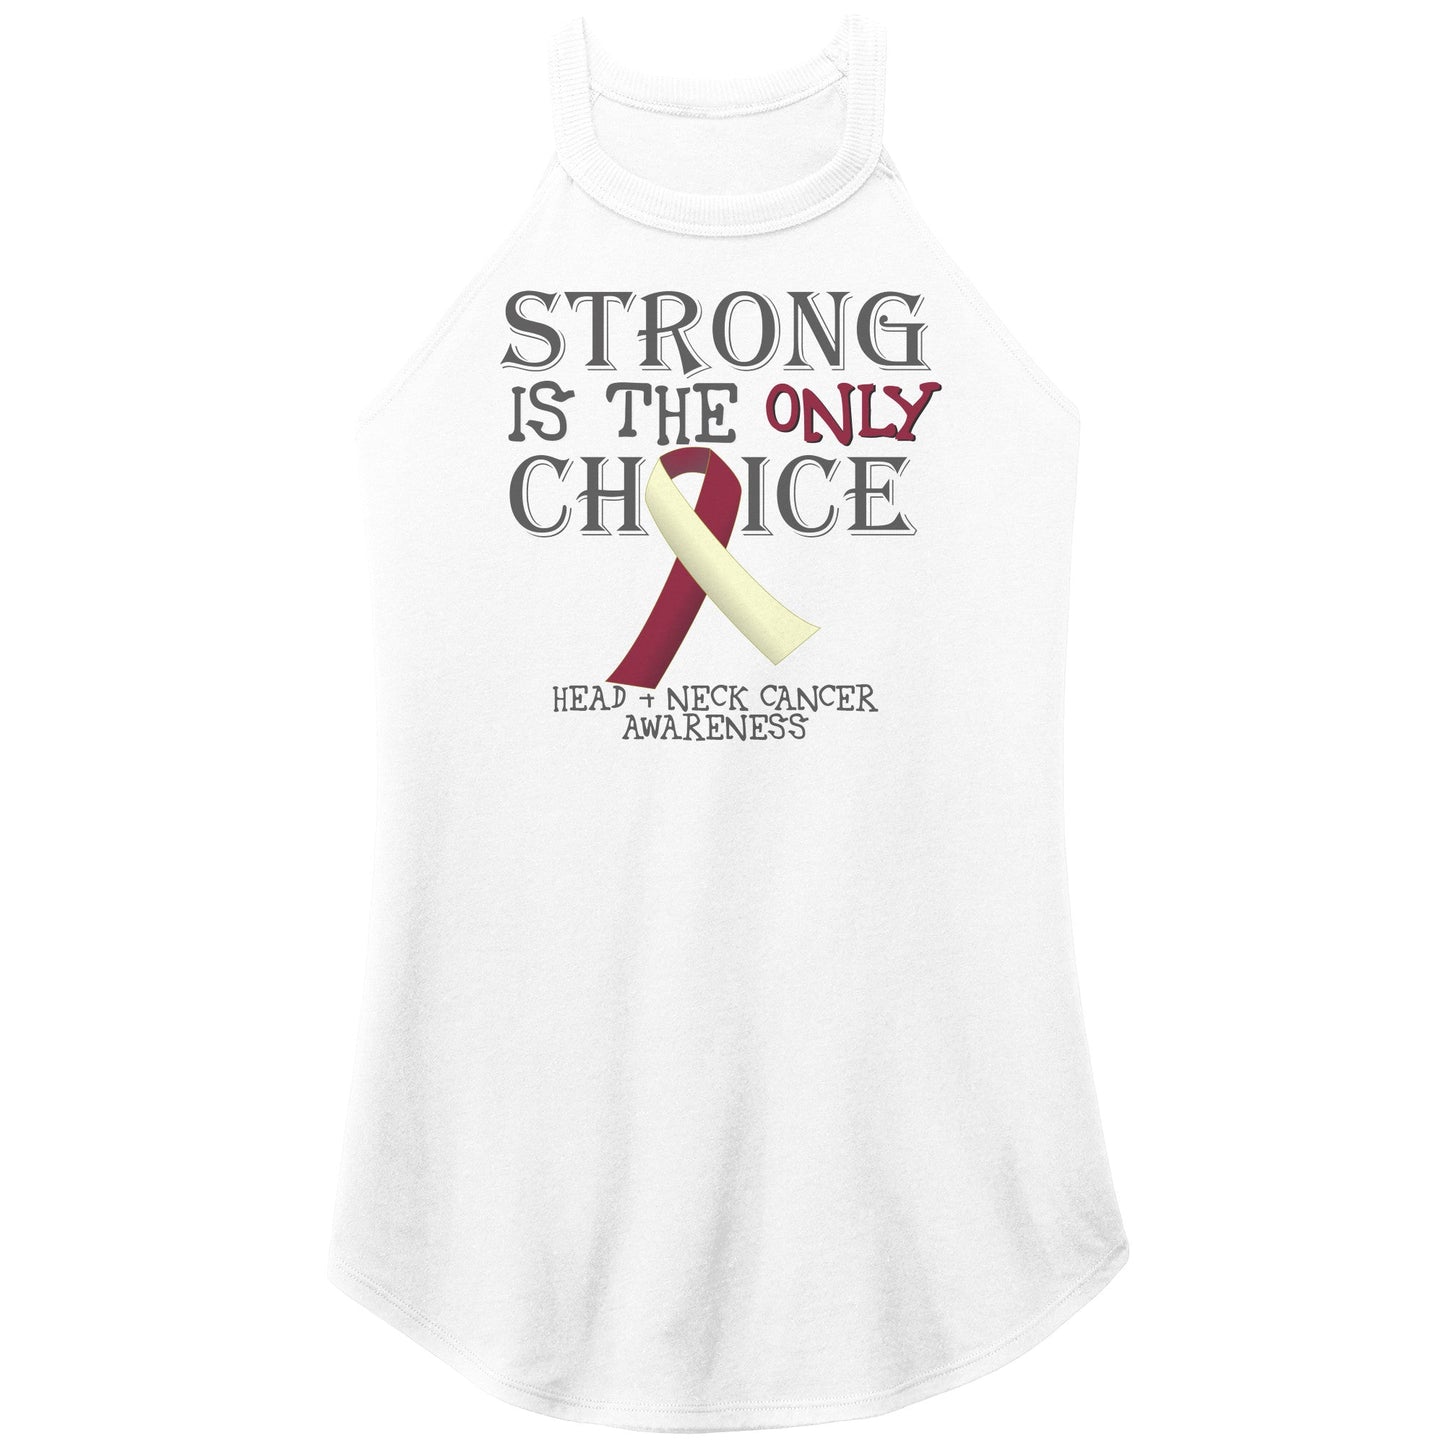 Strong is the Only Choice -Head and Neck Cancer Awareness T-Shirt, Hoodie, Tank |x|